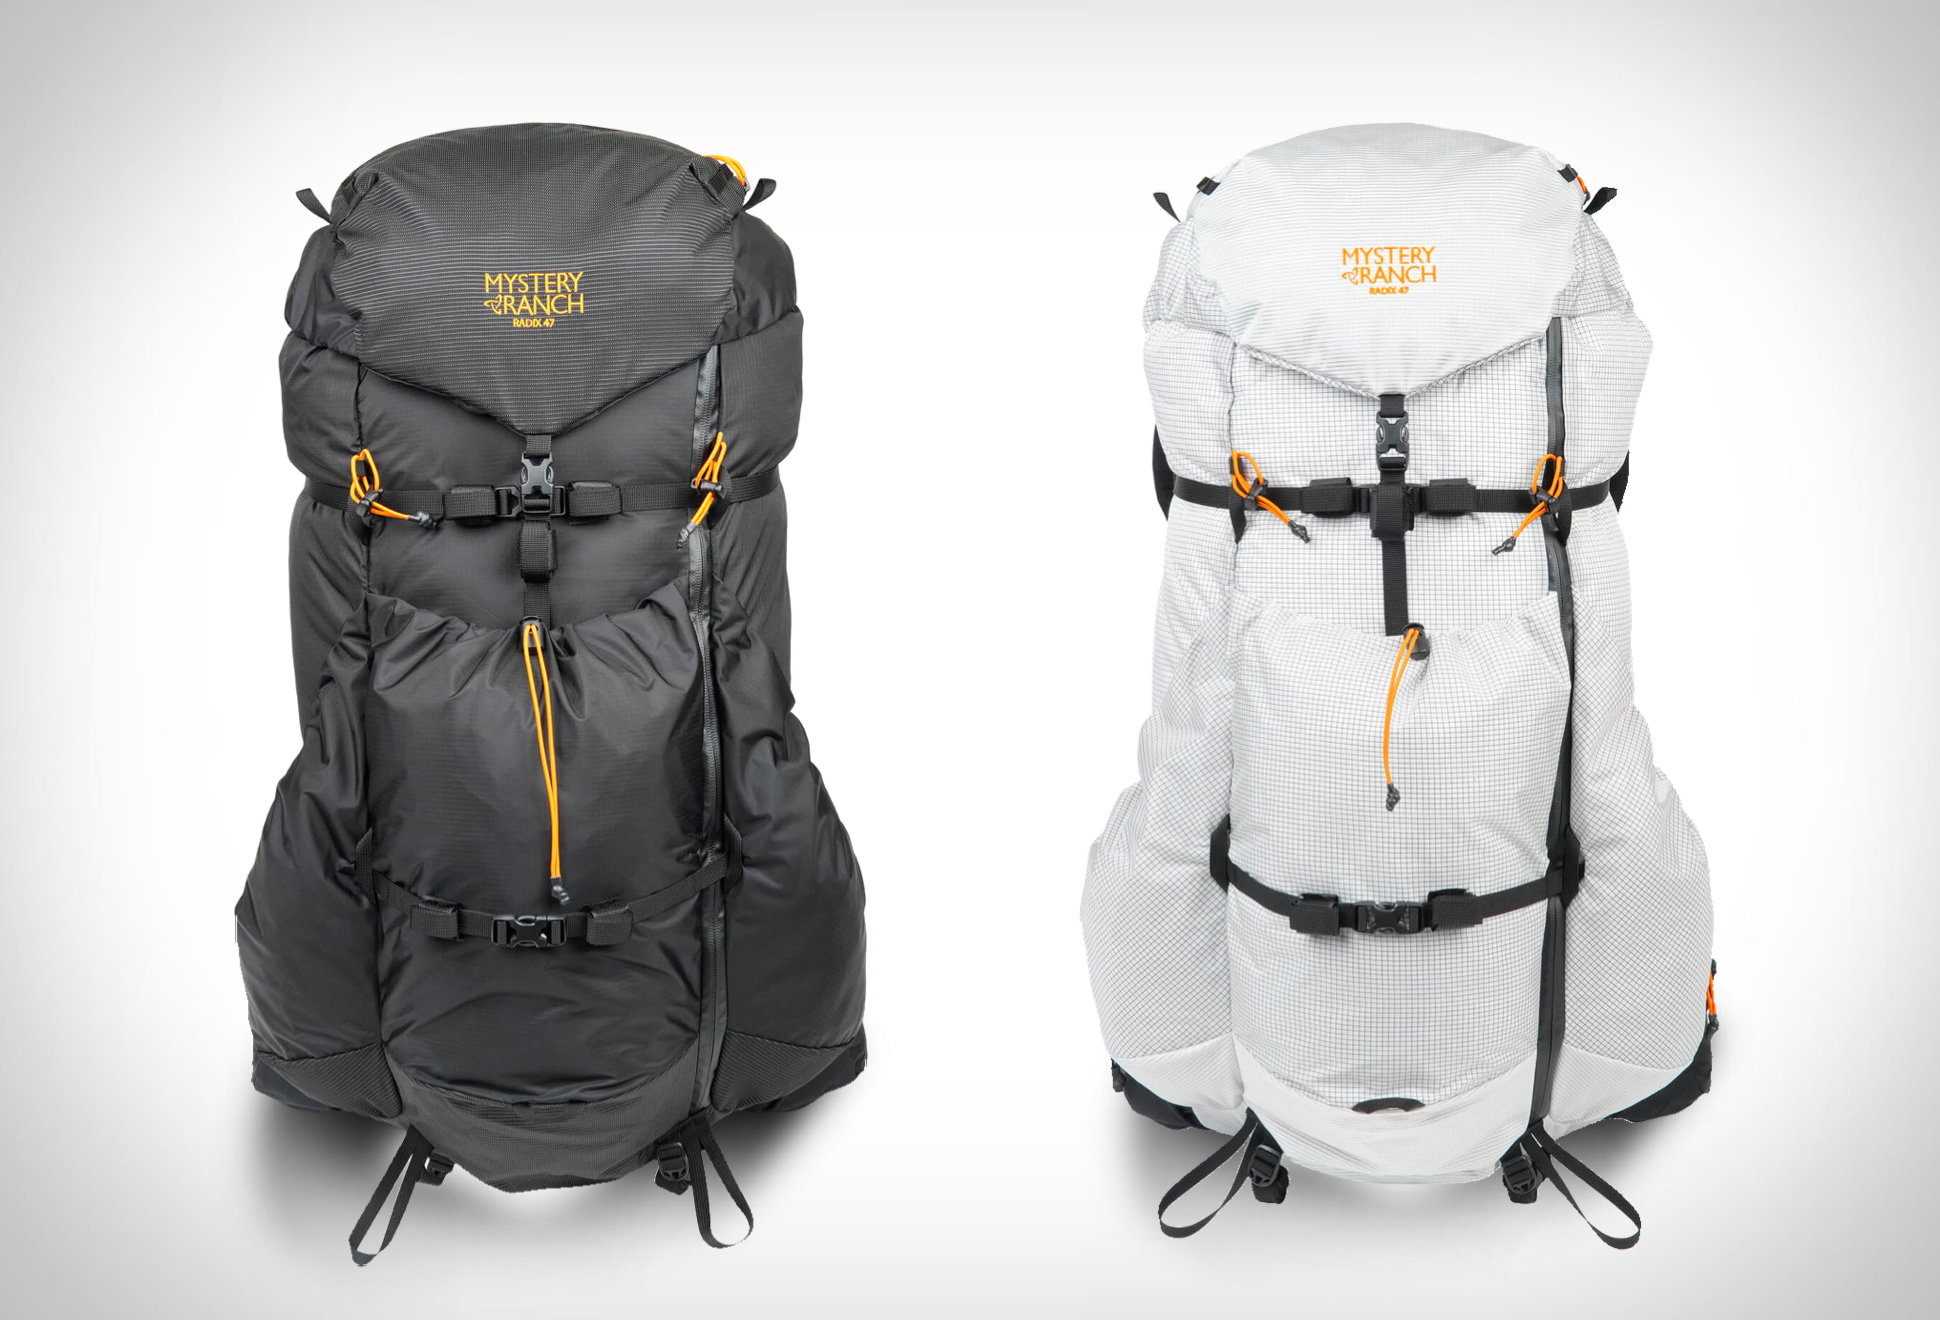 MYSTERY RANCH RADIX ULTRALIGHT HIKING BACKPACK | Image